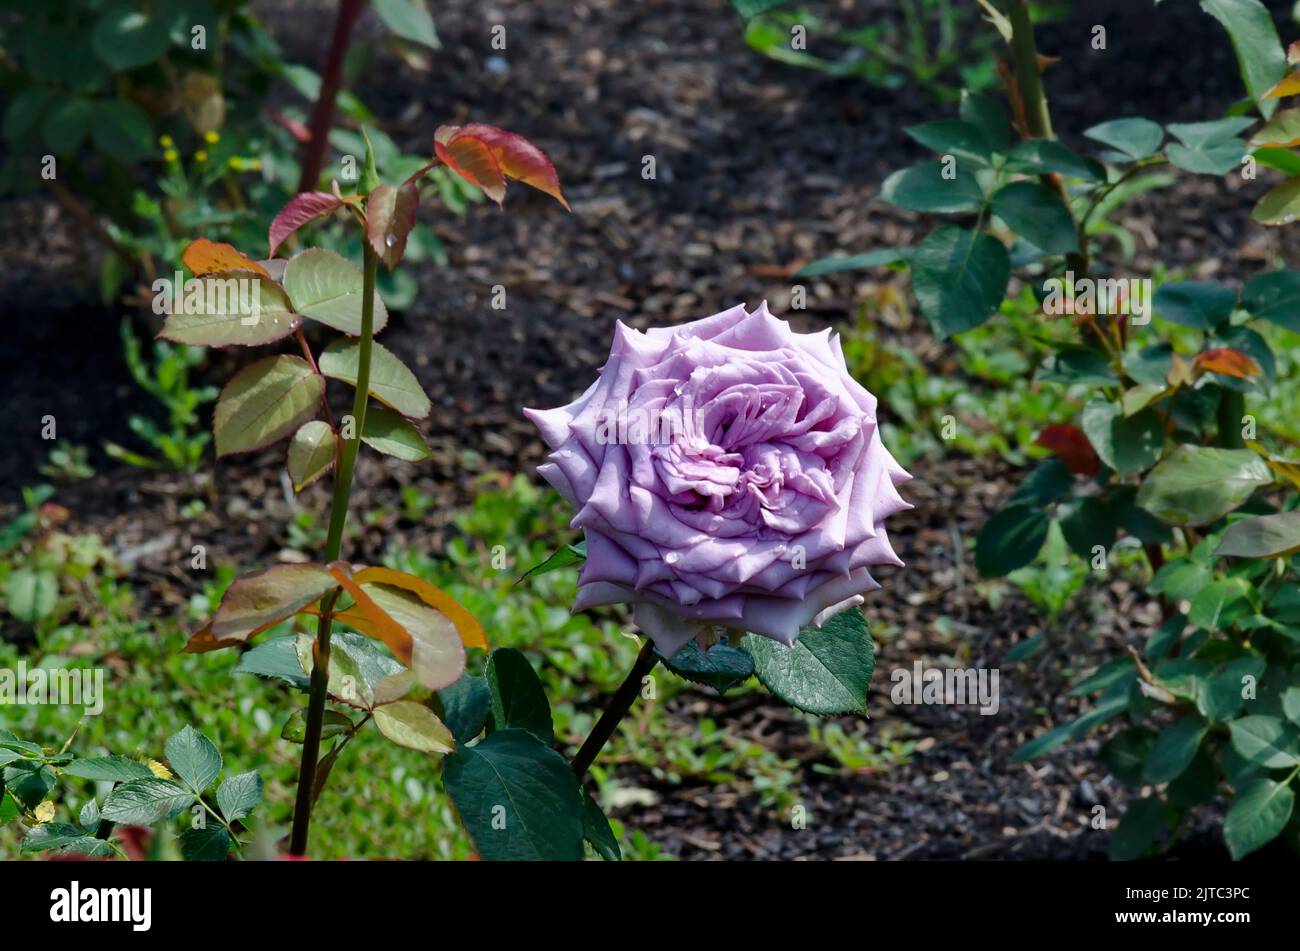 Flowering rose bush in the garden with pastel lilac flowers covered with raindrops, Sofia, Bulgaria Stock Photo